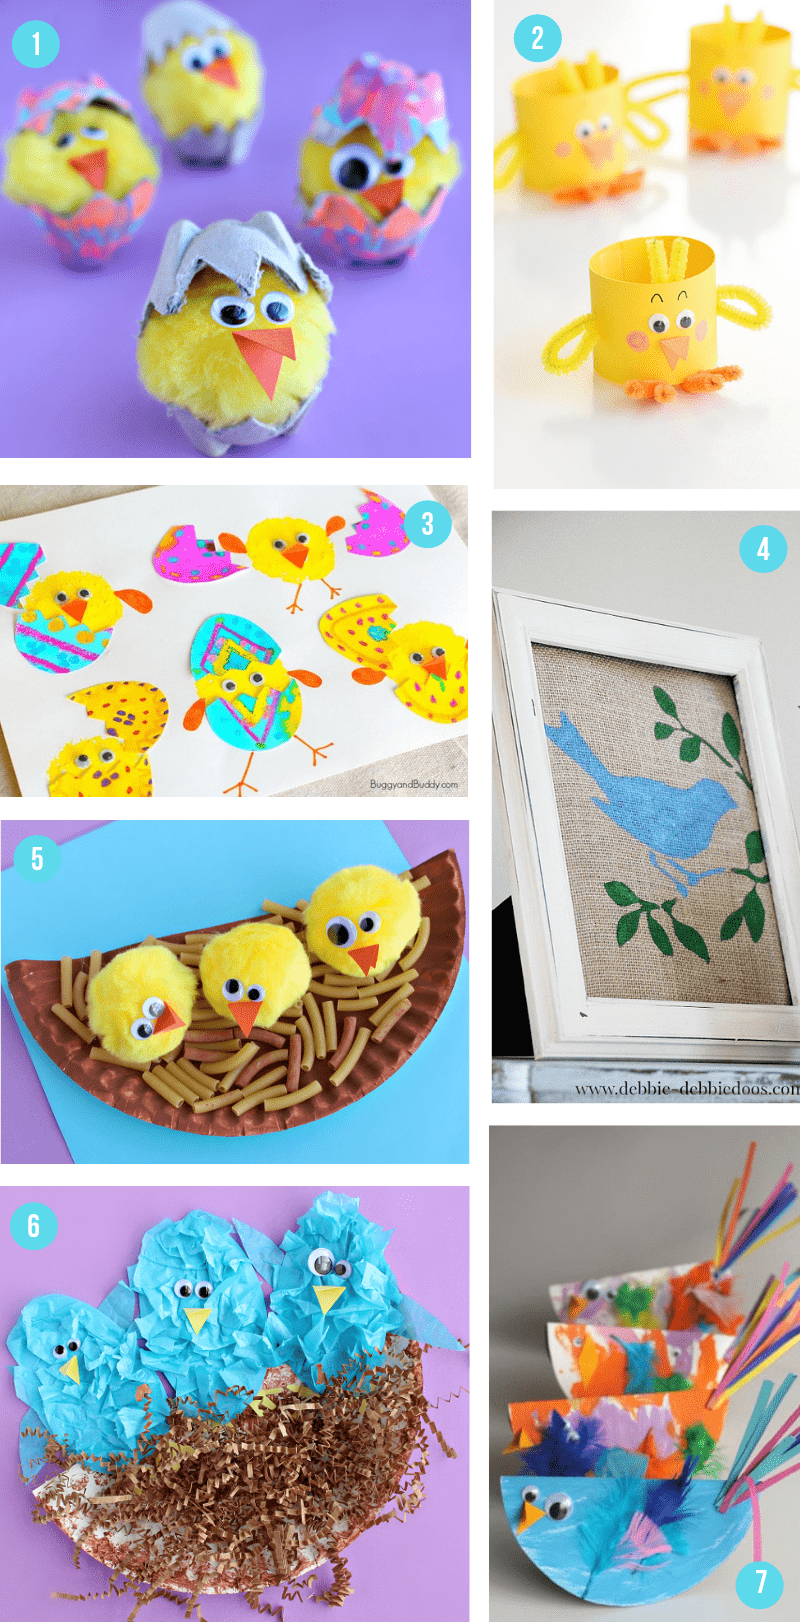 The Epic Collection Of Spring Crafts For Kids All The Best Art Projects Activities To Celebrate The Season What Moms Love,Coin Stores Near Me Open